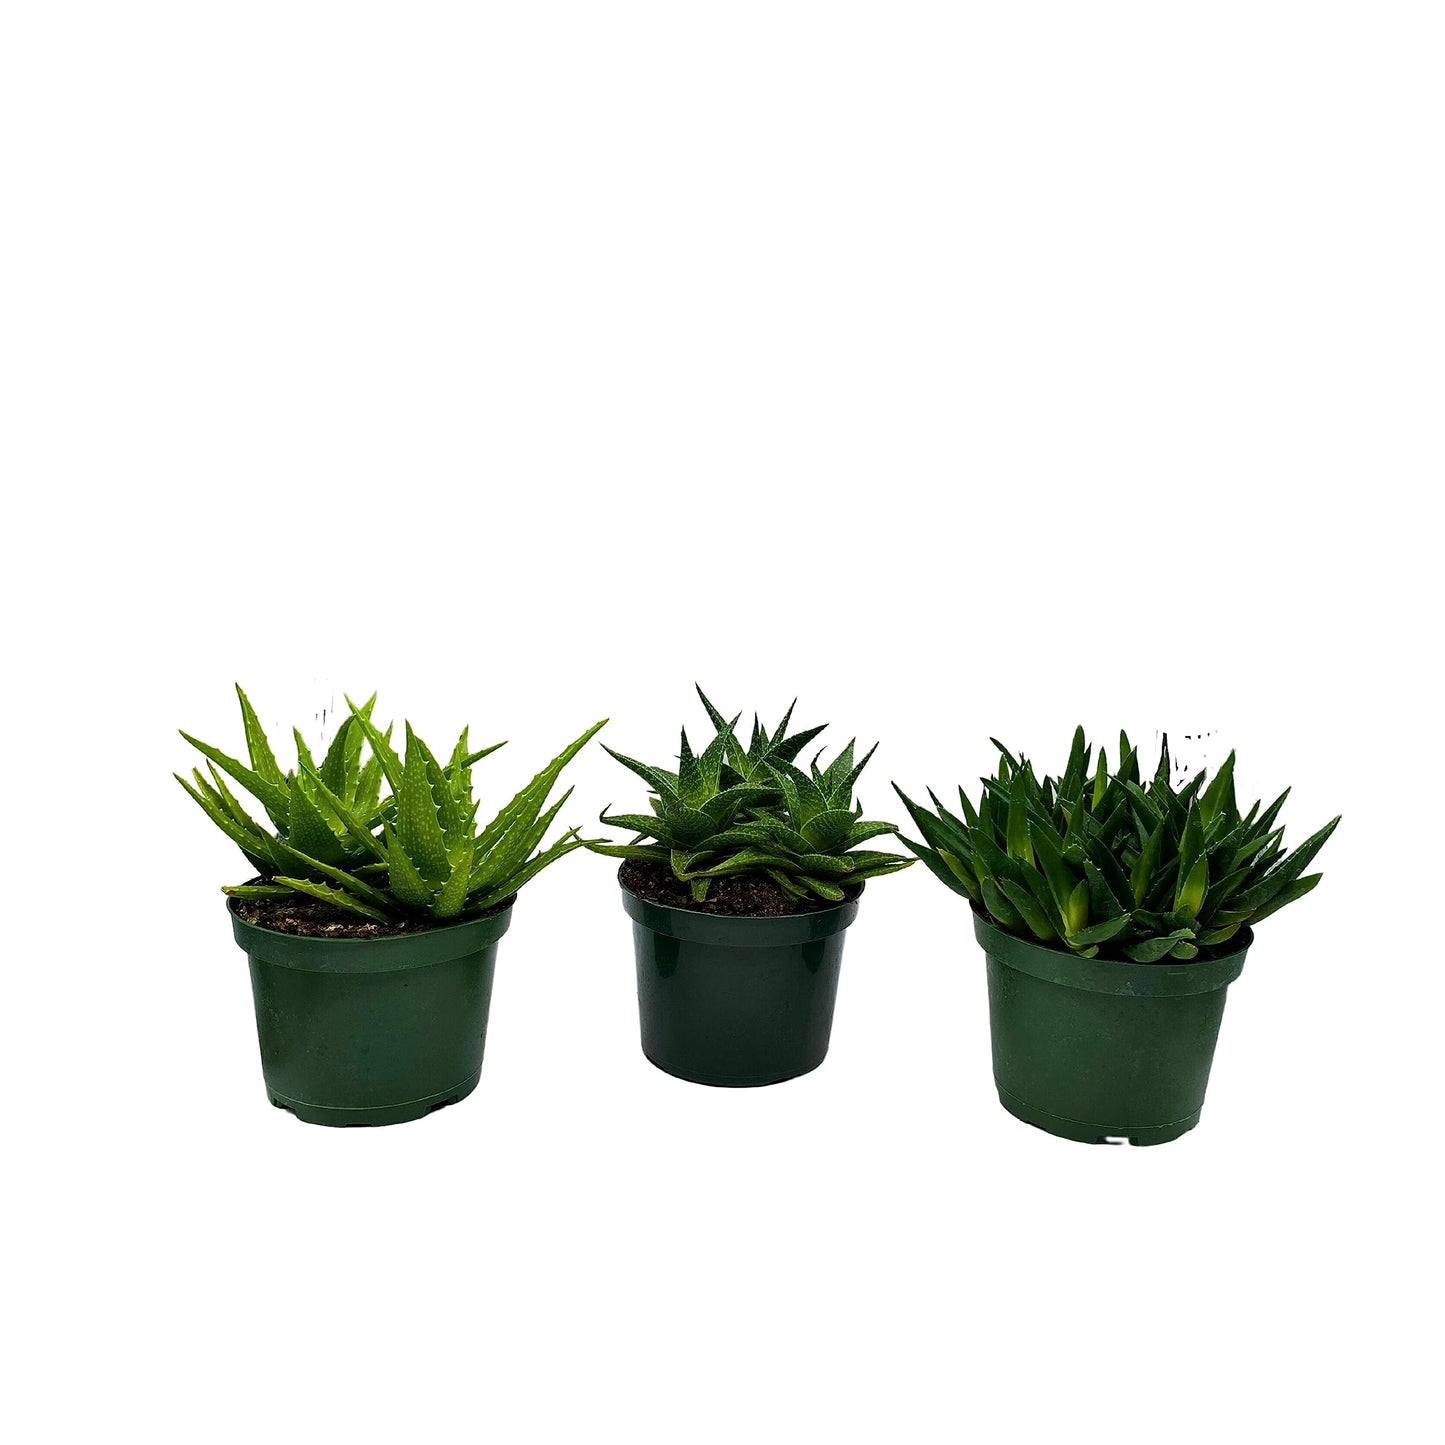 Aloe Assortment, Aloe Variety Set of 3, Grower's Choice in 6 inch pots